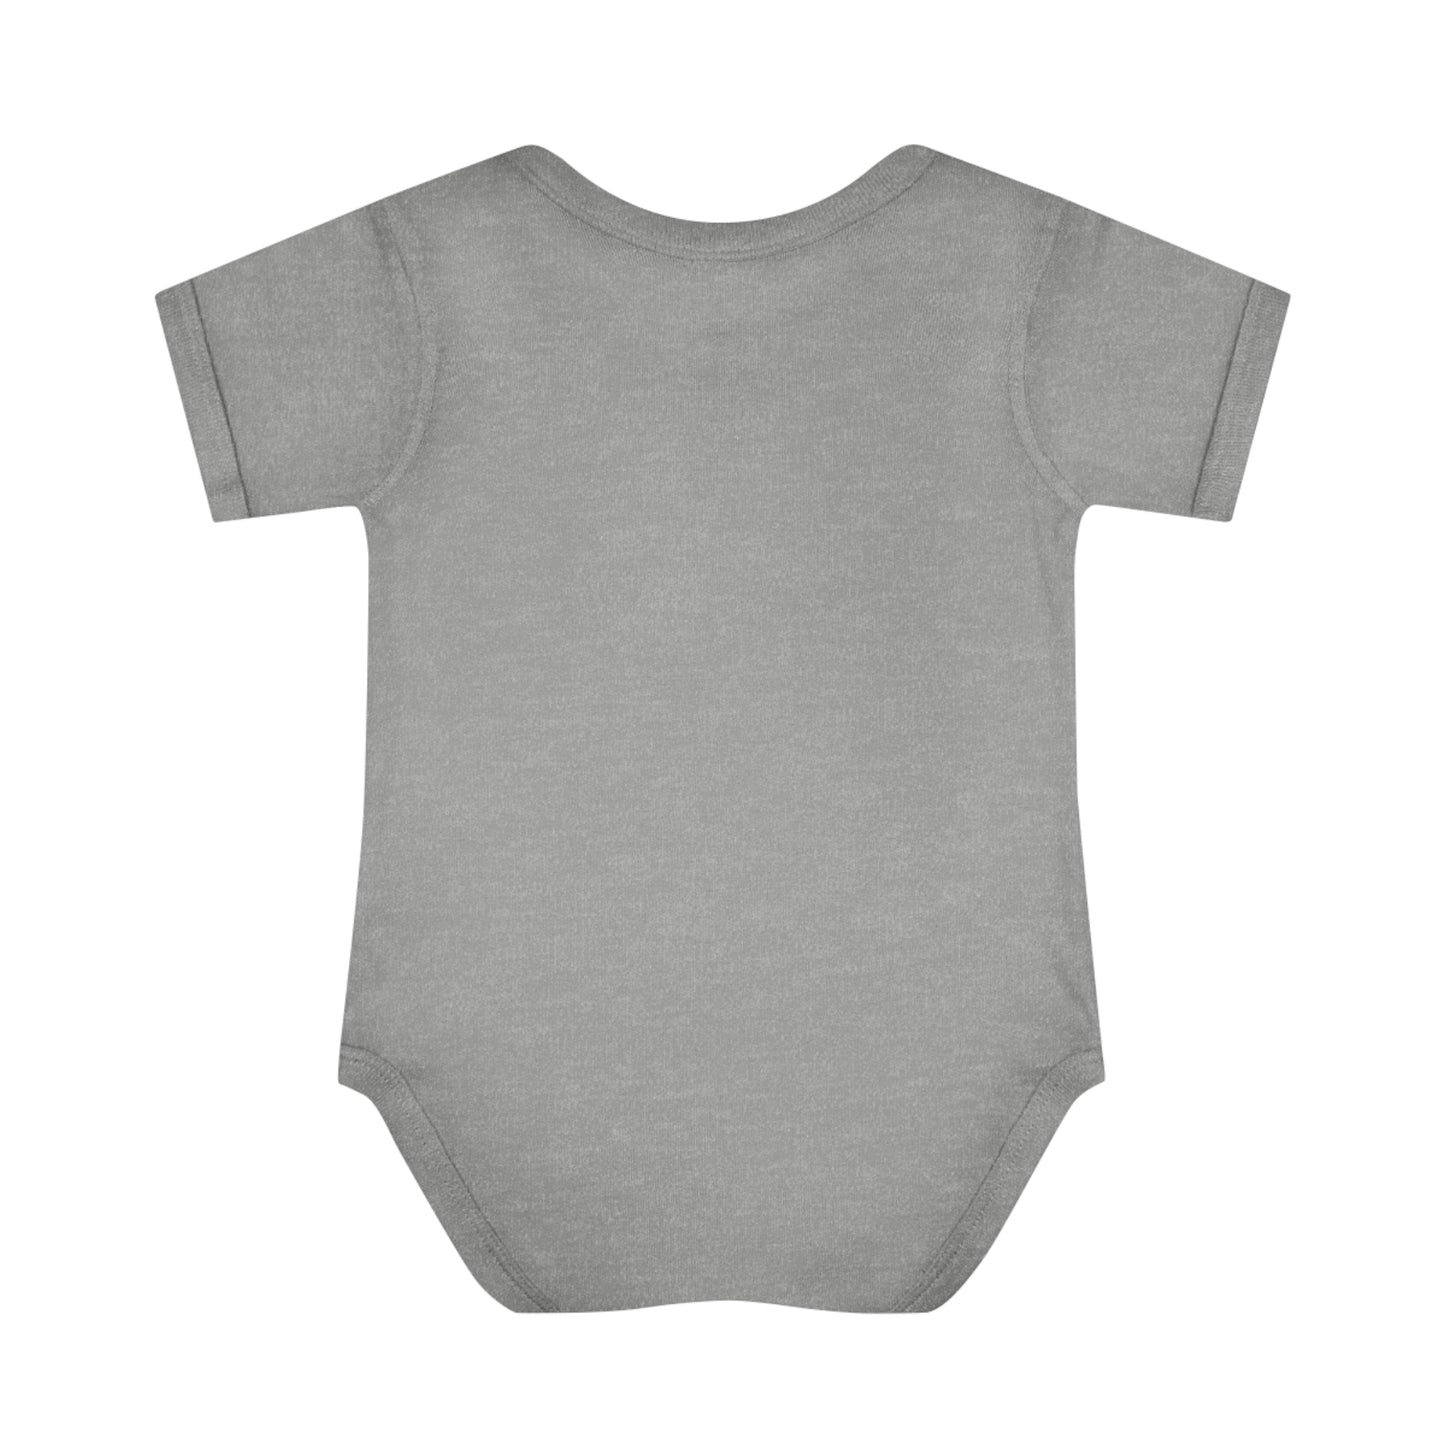 Christ Carried My Burdens So I Could Thrive Christian Baby Onesie Printify